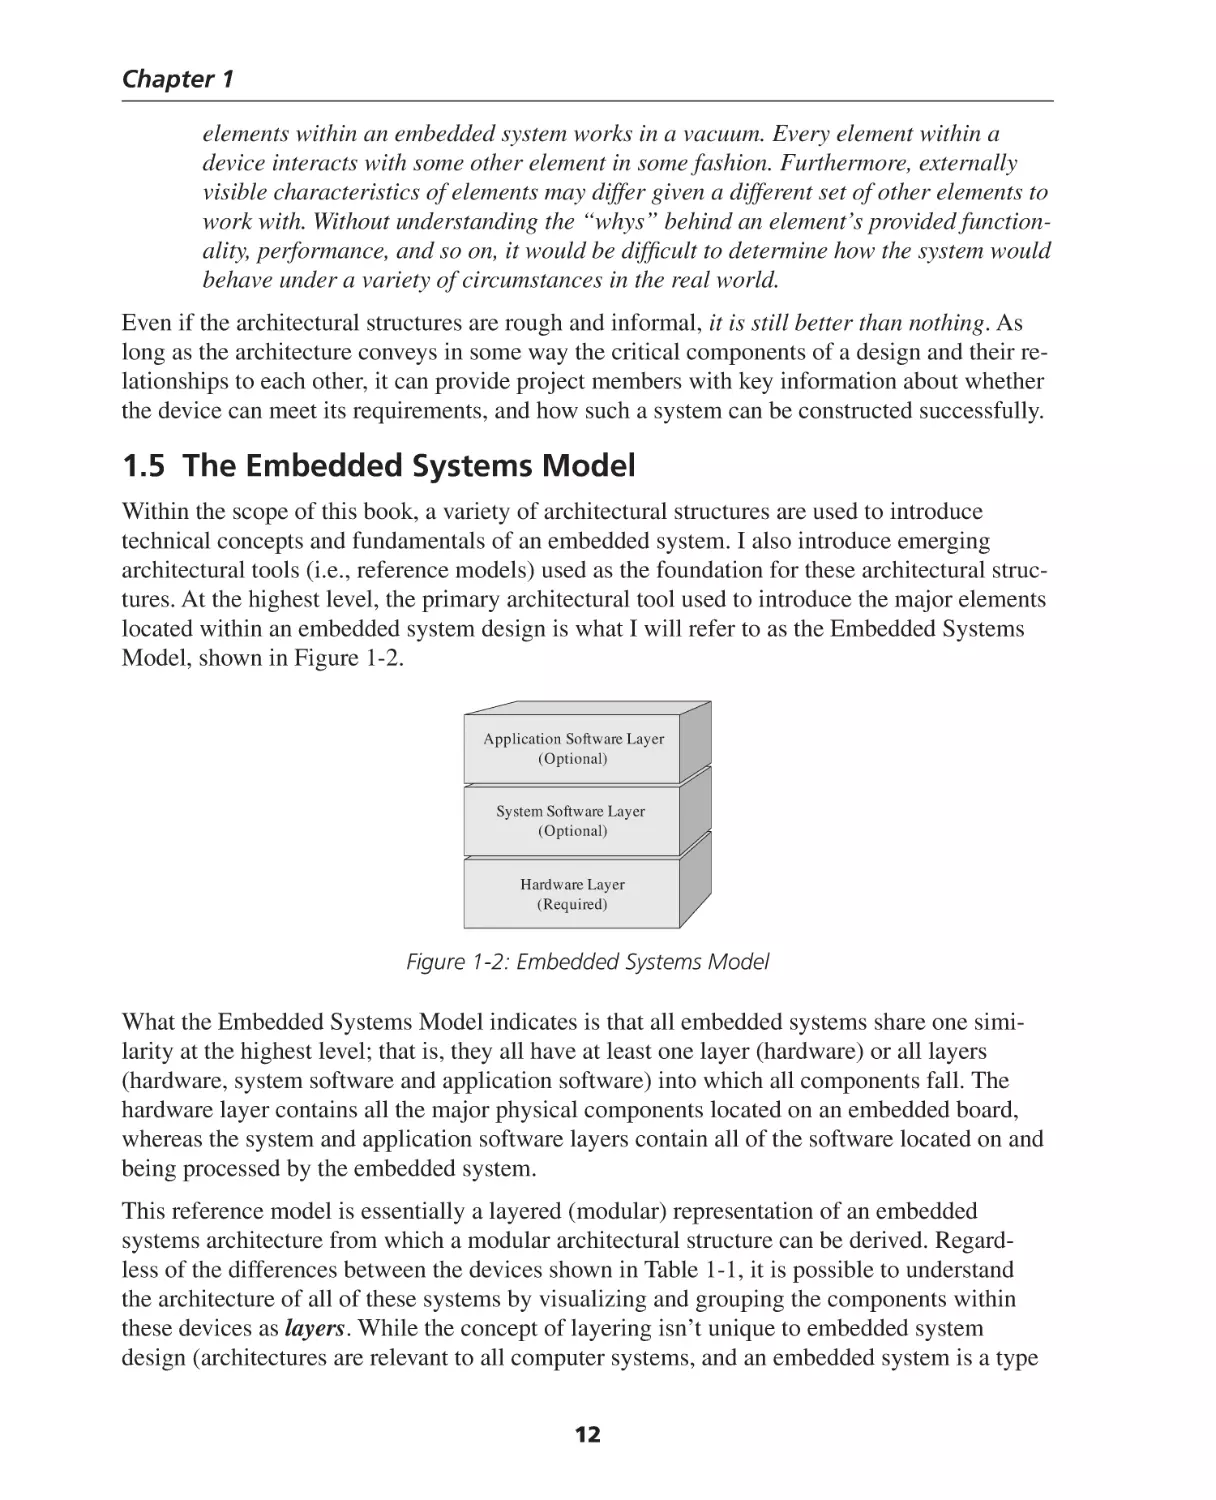 1.5 The Embedded Systems Model